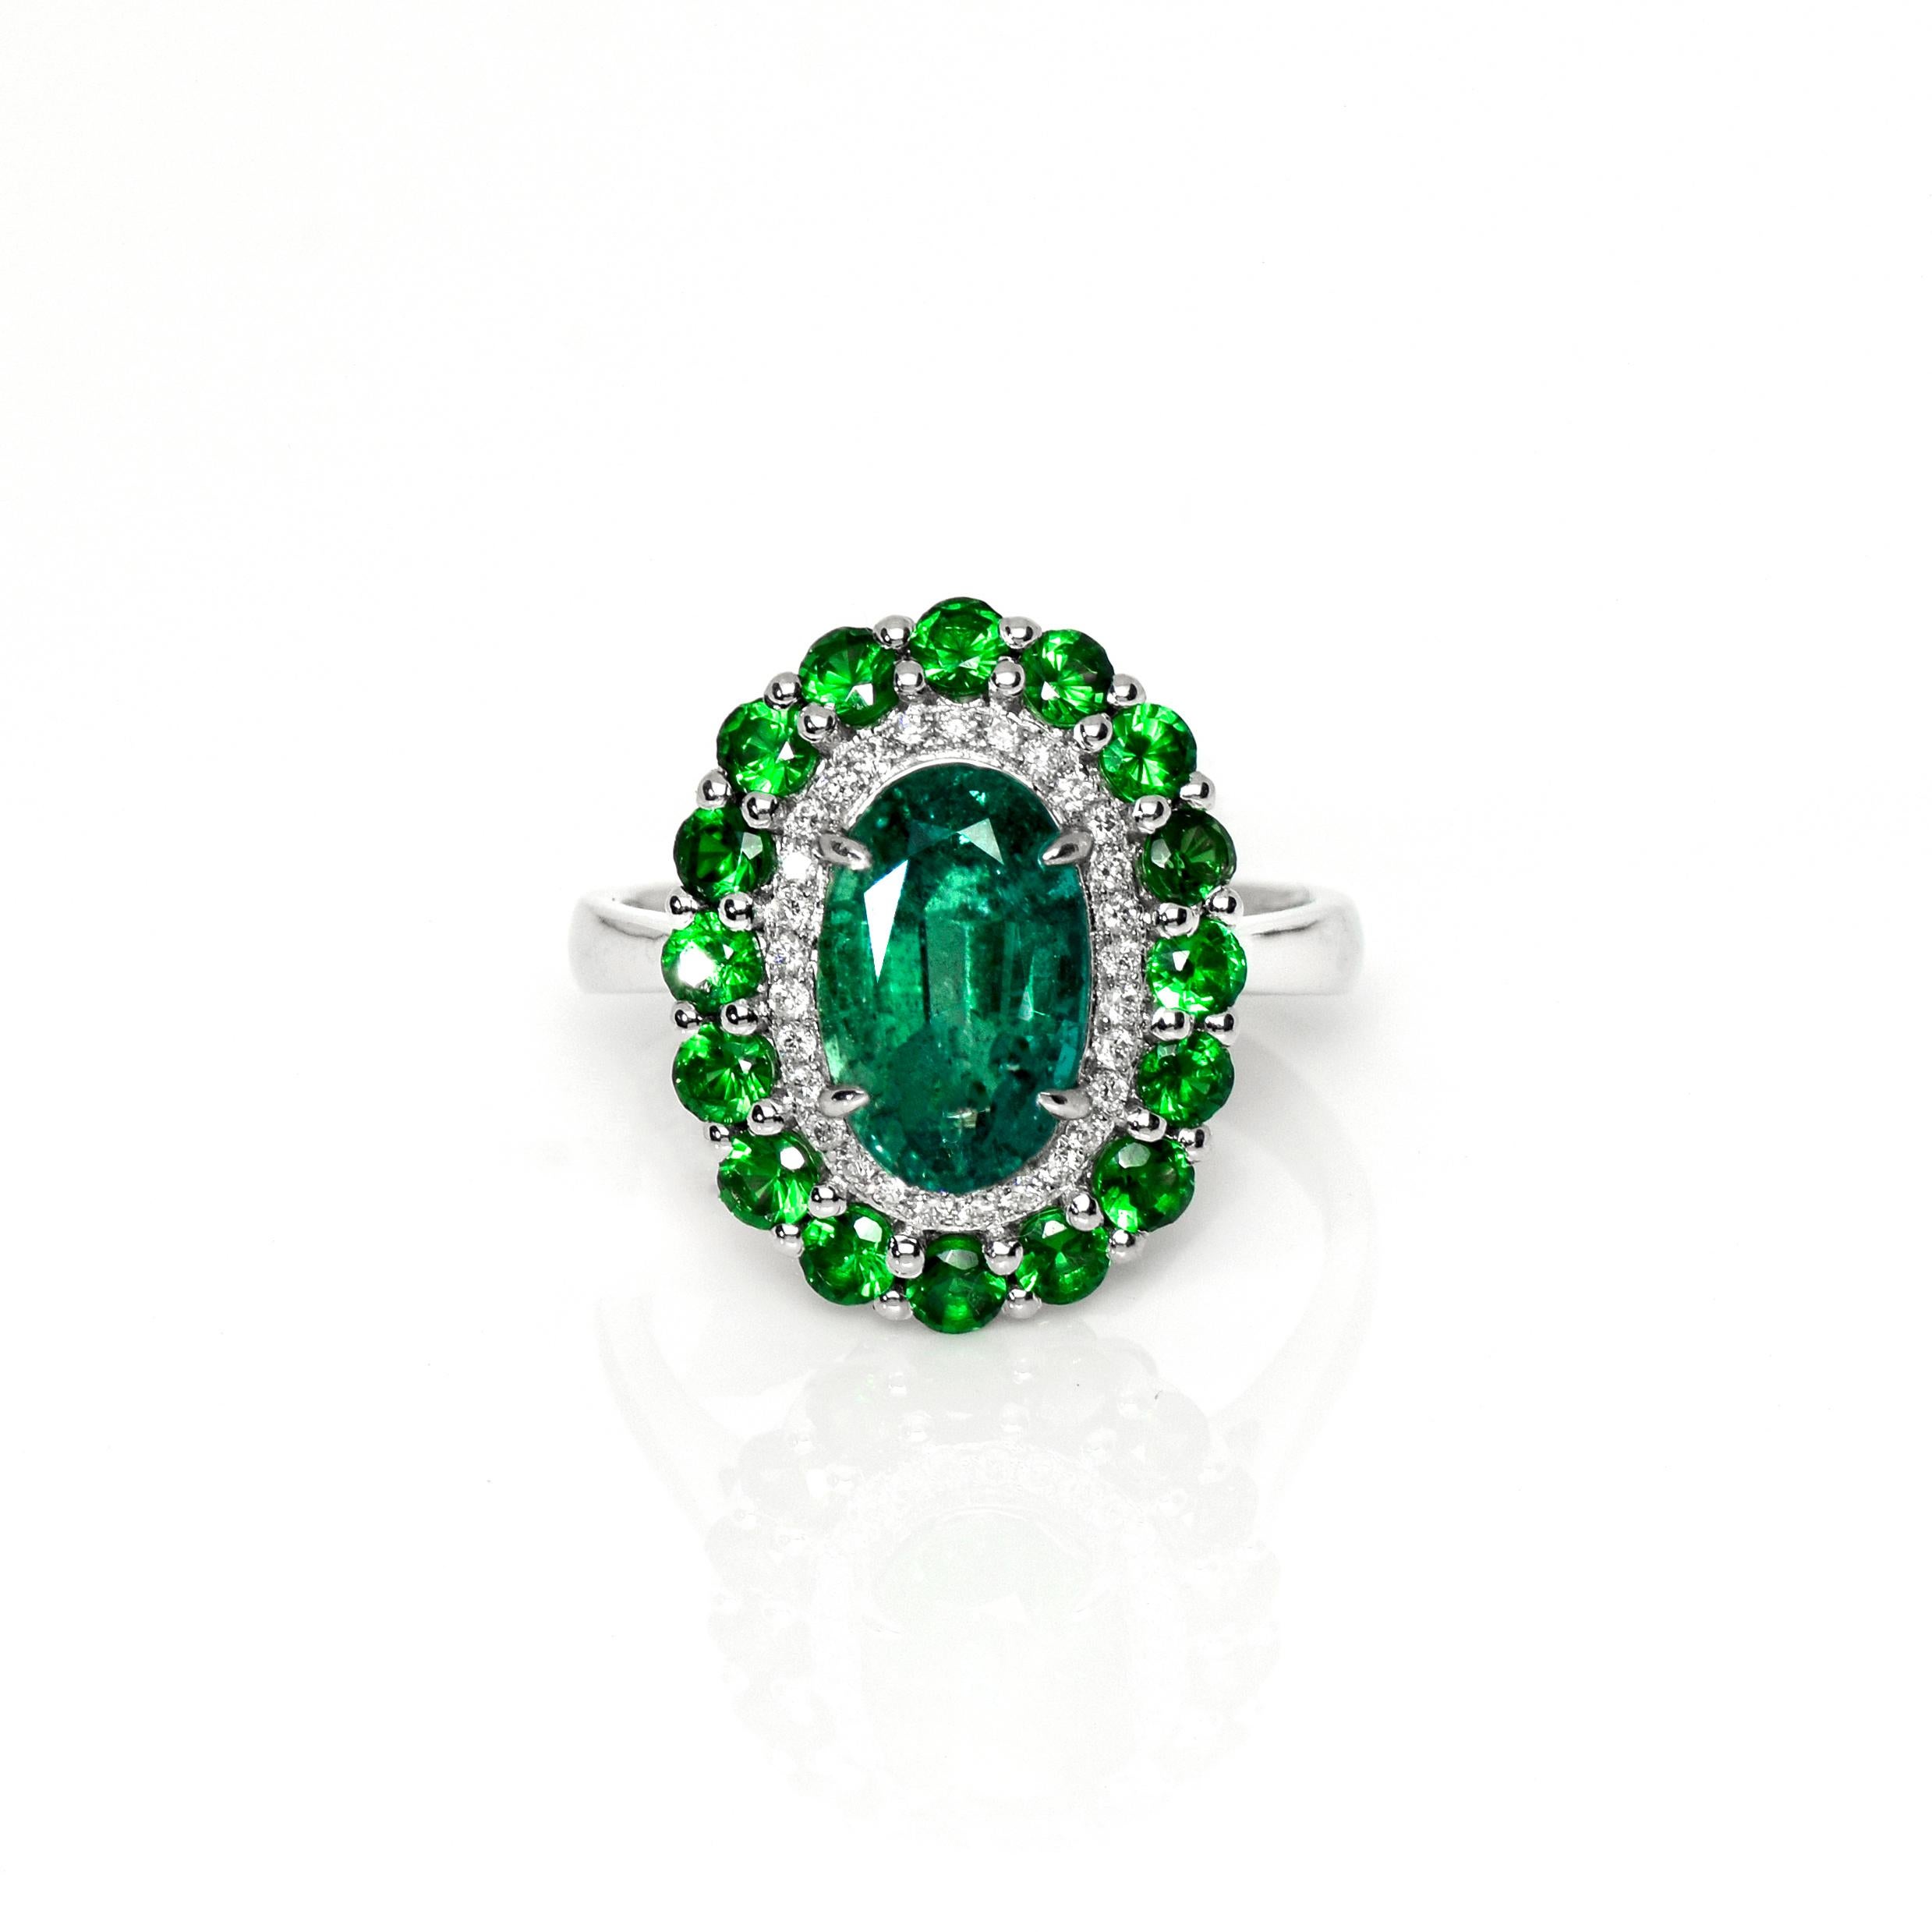 **IGI 18K White Gold 2.21 ct Emerald&Tsavorites Antique Art Deco Style Engagement Ring** 

This ring features a 2.21 ct natural Emerald with an intense luster that is IGI-certified and set on an 18K white gold band with a double halos design. The